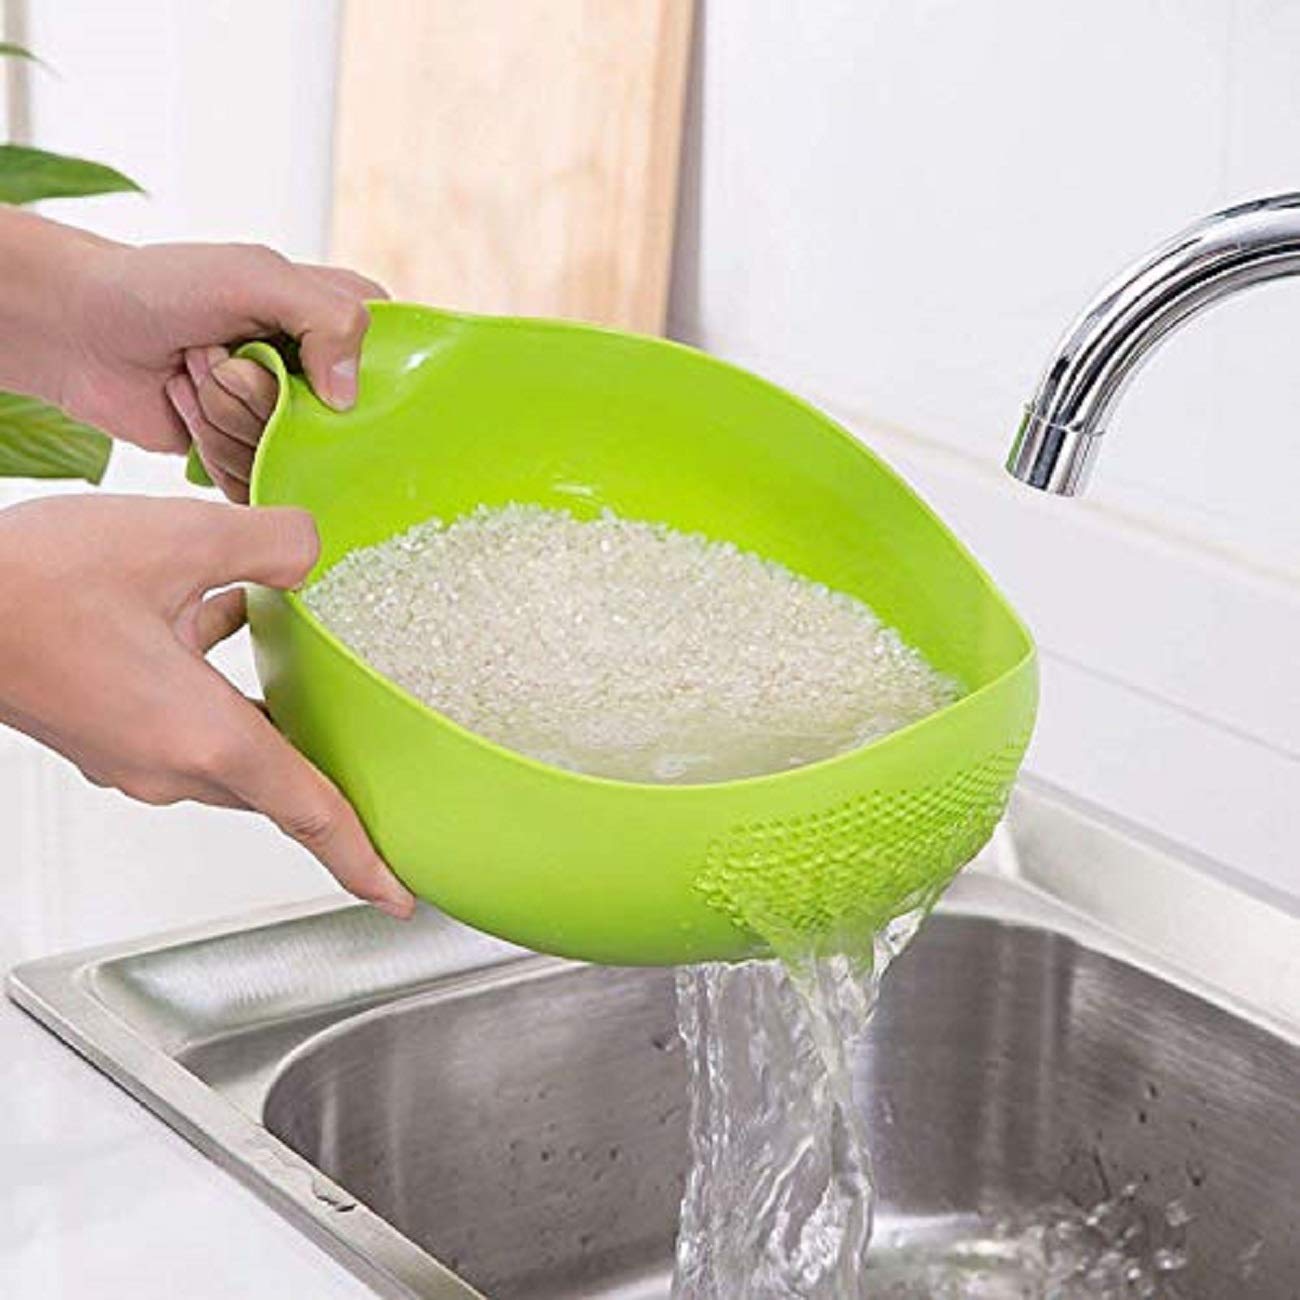 Pramukh Fashion Rice Pulses Fruits Vegetable Noodles Pasta Washing Bowl & Strainer Good Quality & Perfect Size for Storing and Straining Pack of 1